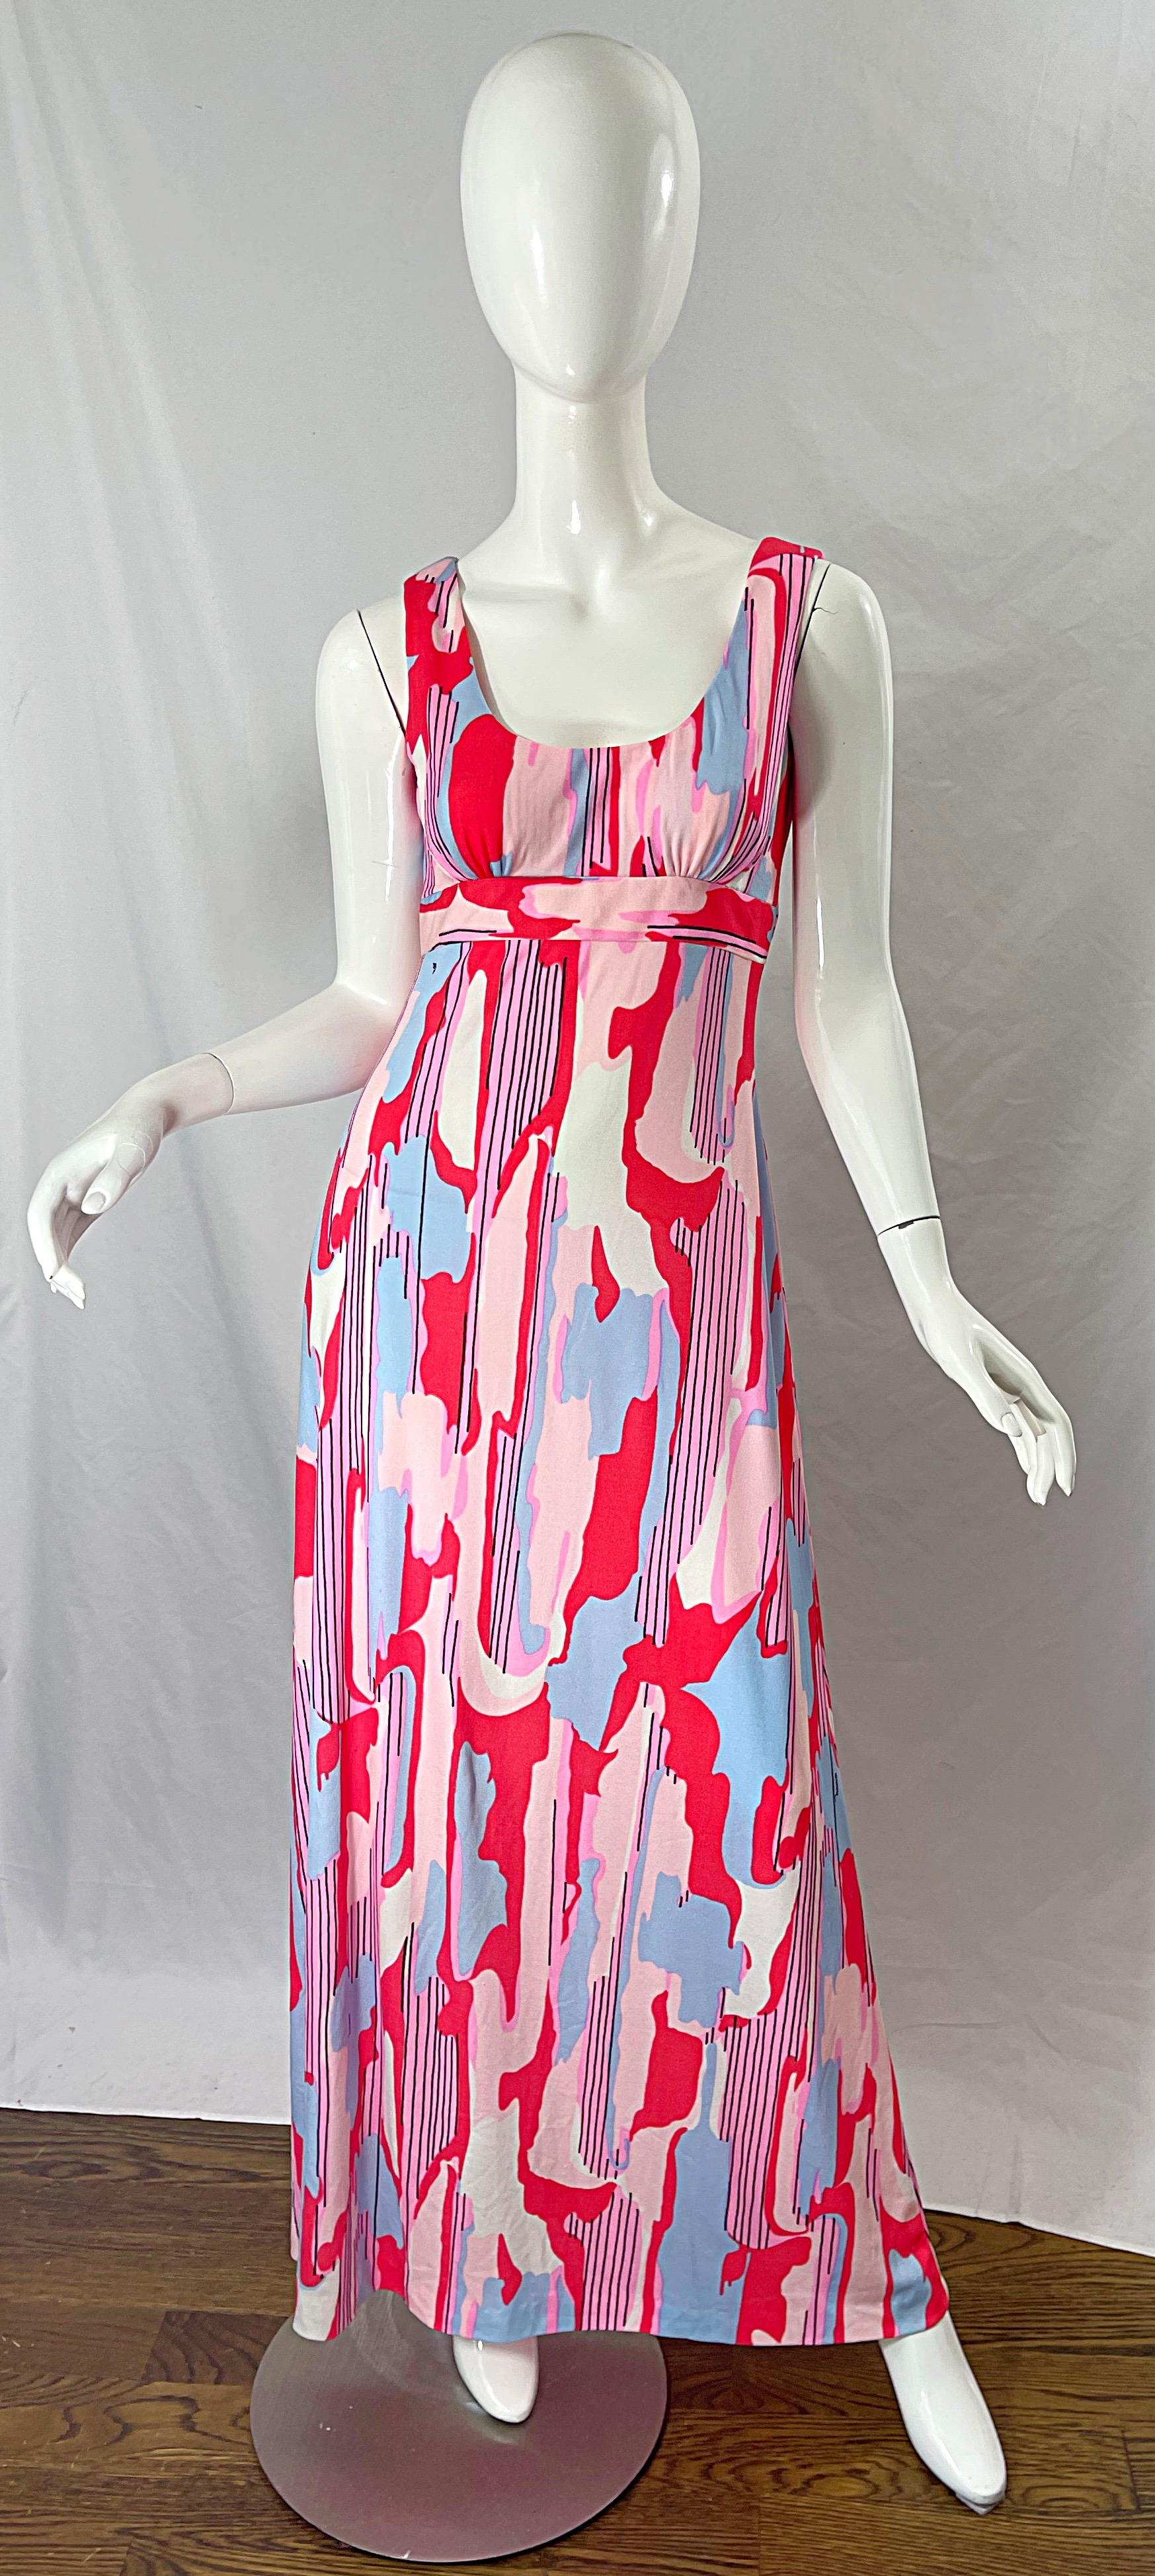 Amazing vintage 70s MAURICE signed pink, blue, coral and white jersey maxi dress ! Features abstract prints with the Maurice signature throughout. Hidden zipper up the back with hook-and-eye closure. Can easily be worn for any day or evening event.